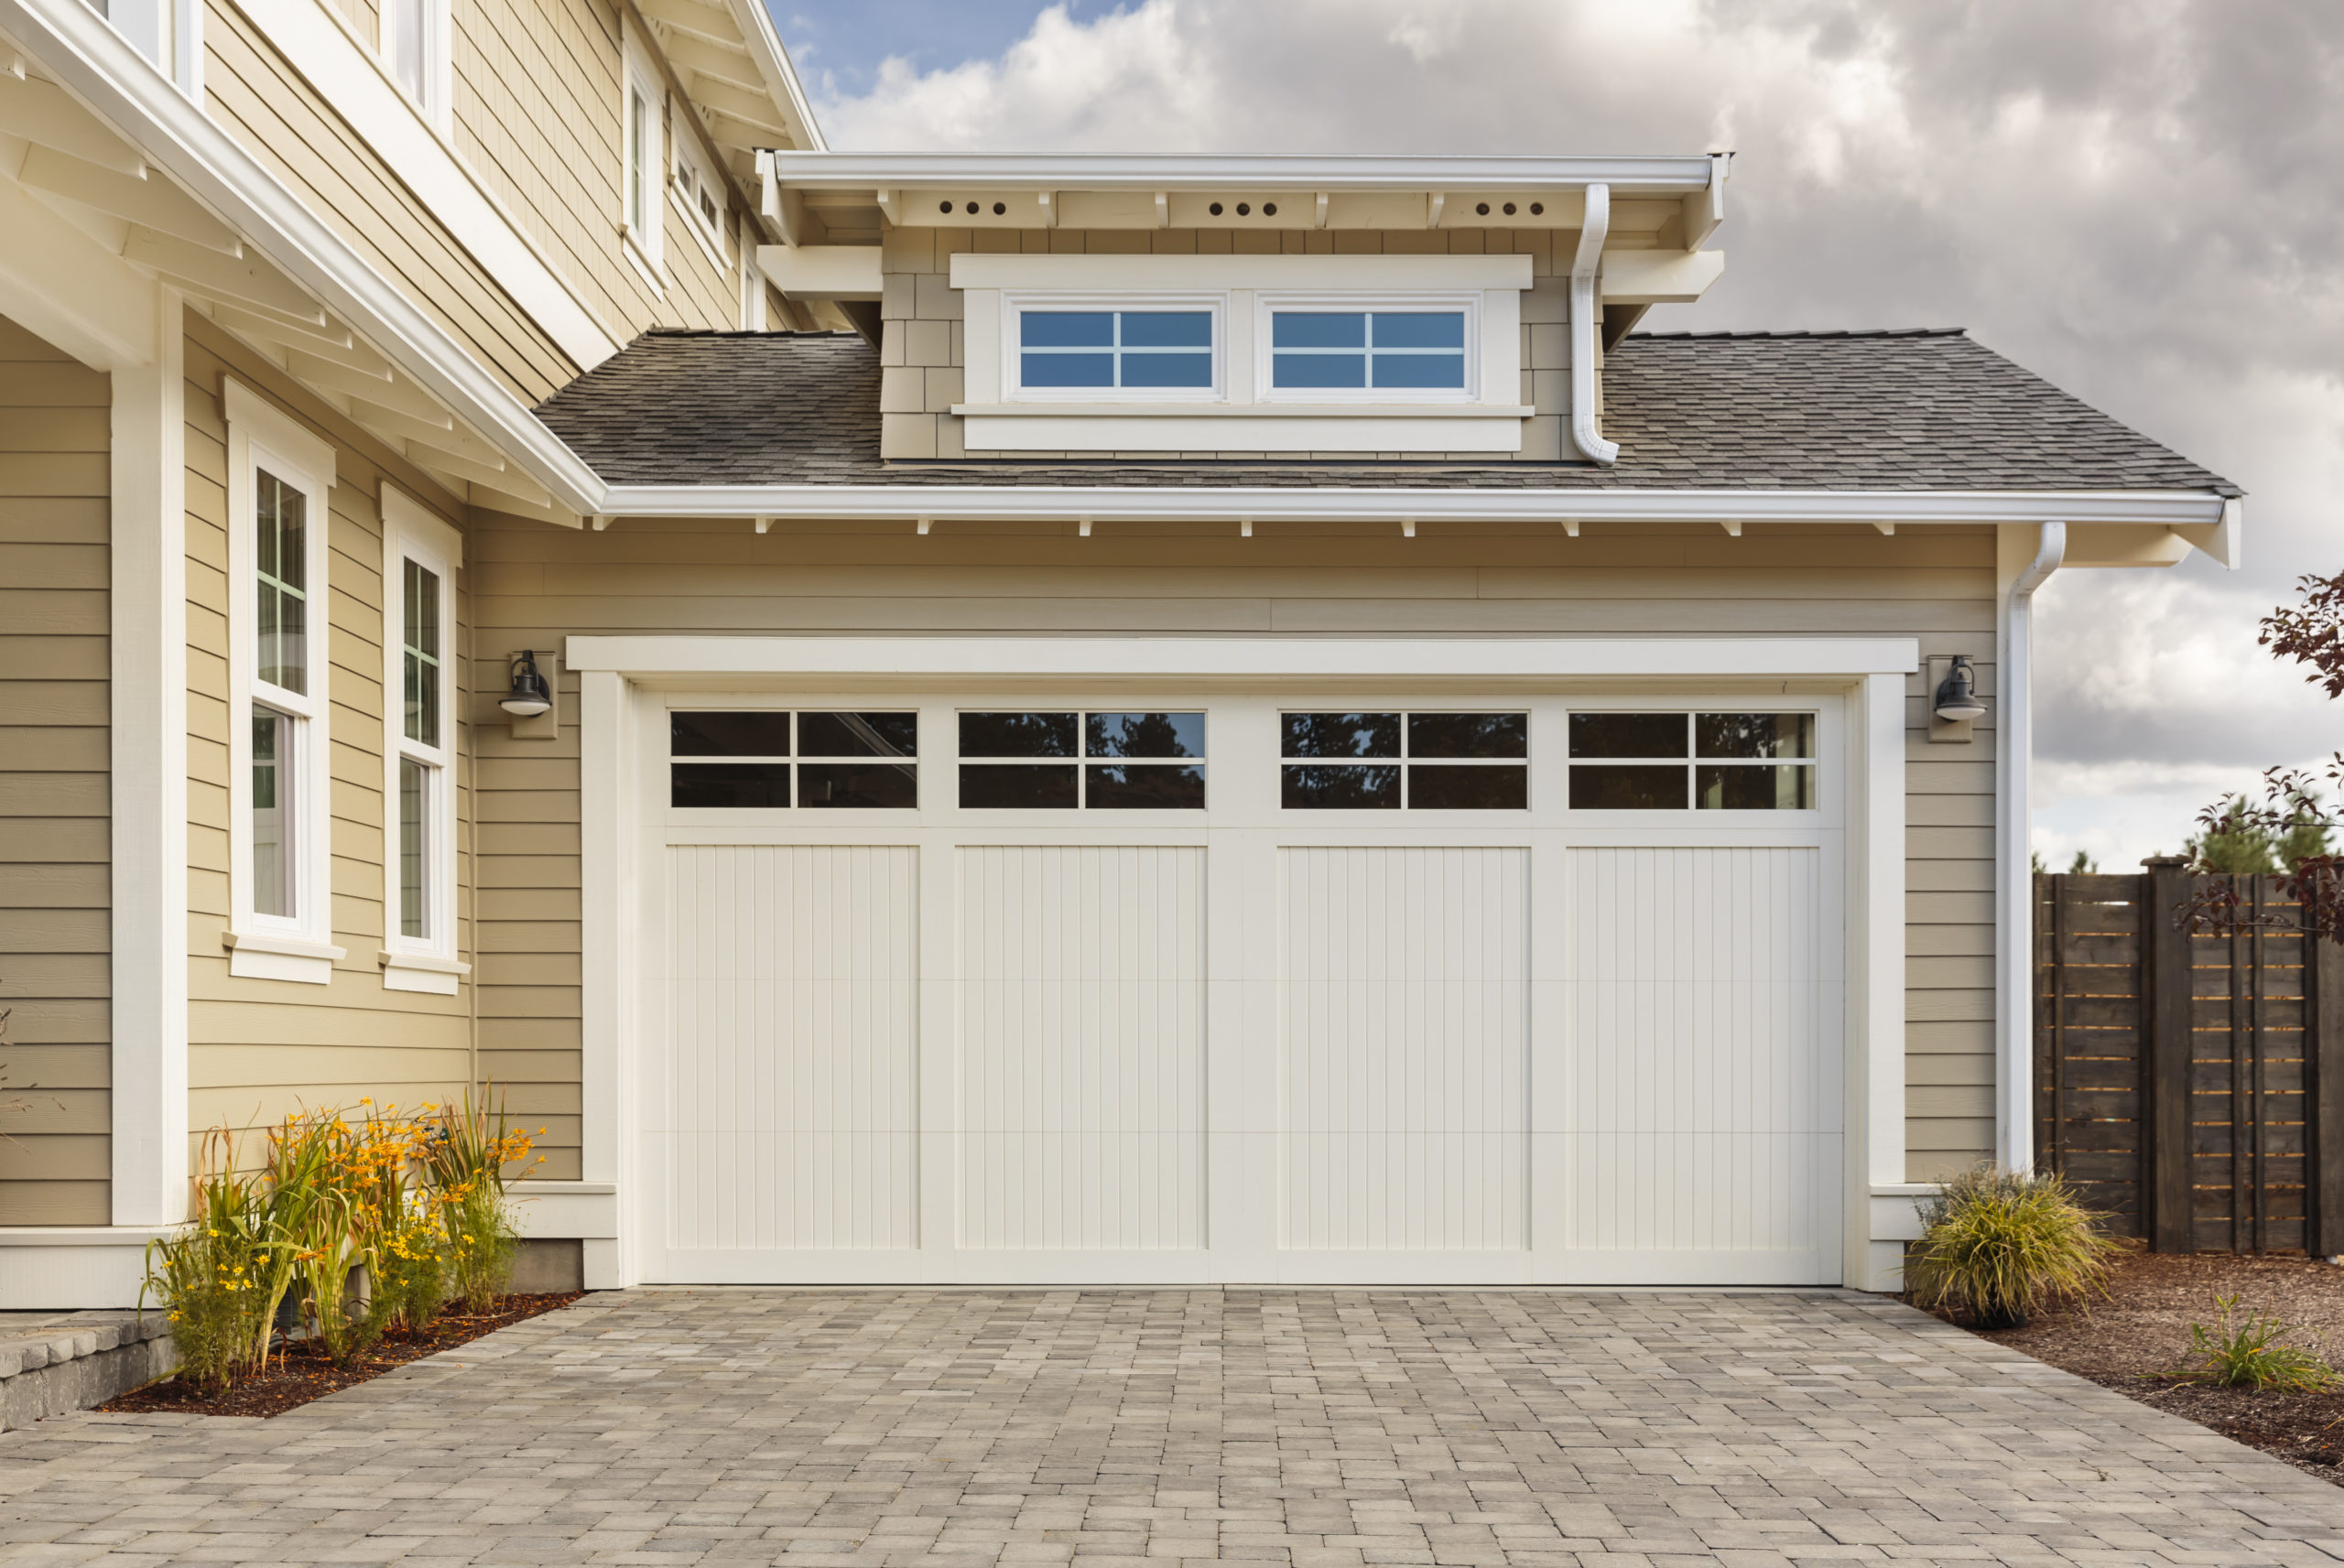 White,Garage,Door,With,A,Driveway,Made,With,Brick